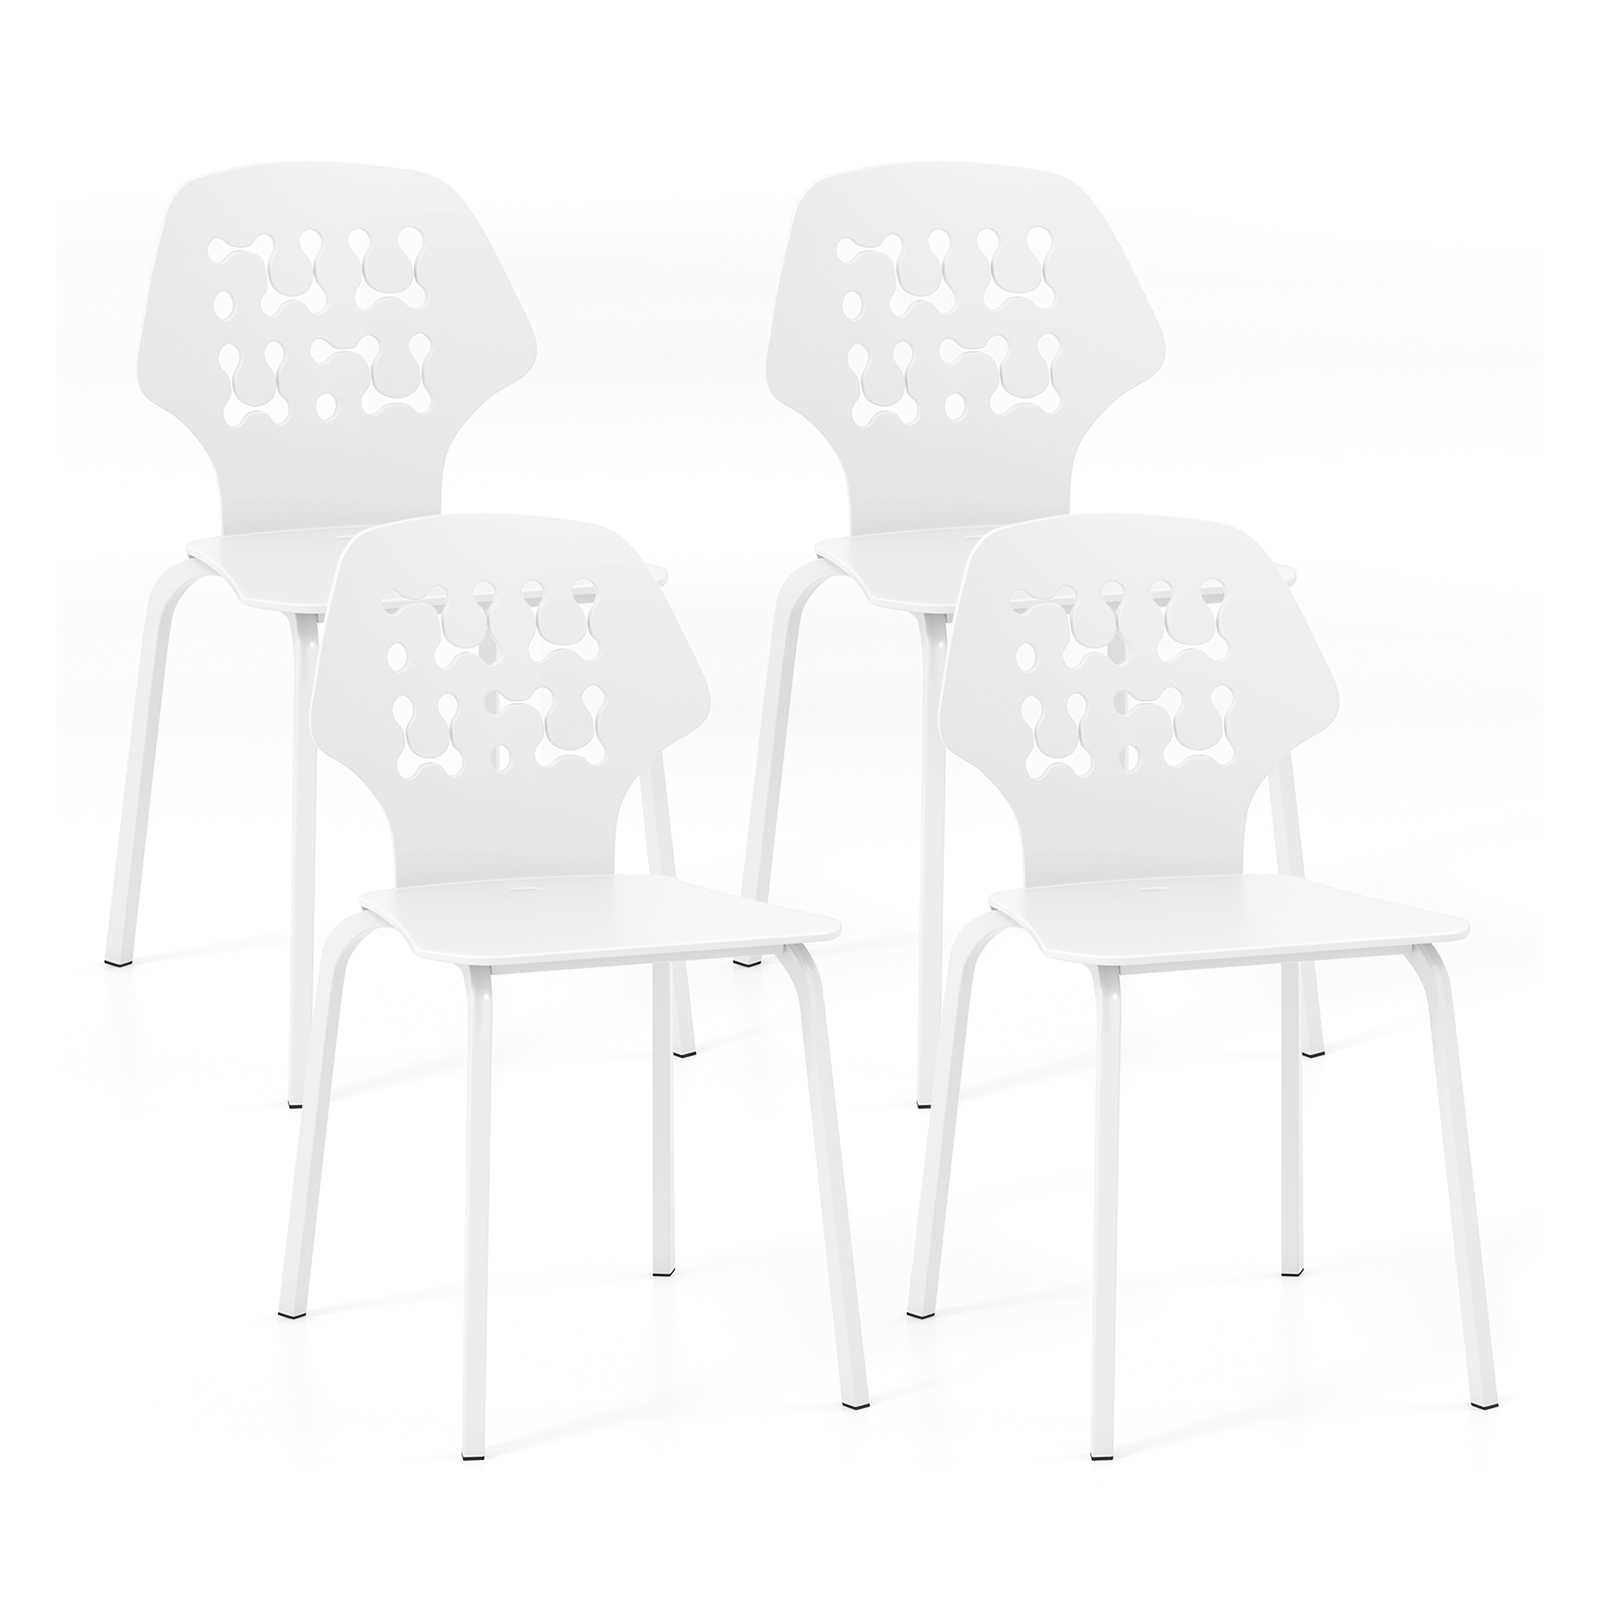 Metal Dining Chair Set of 4 with Hollowed Backrest and Metal Legs-White